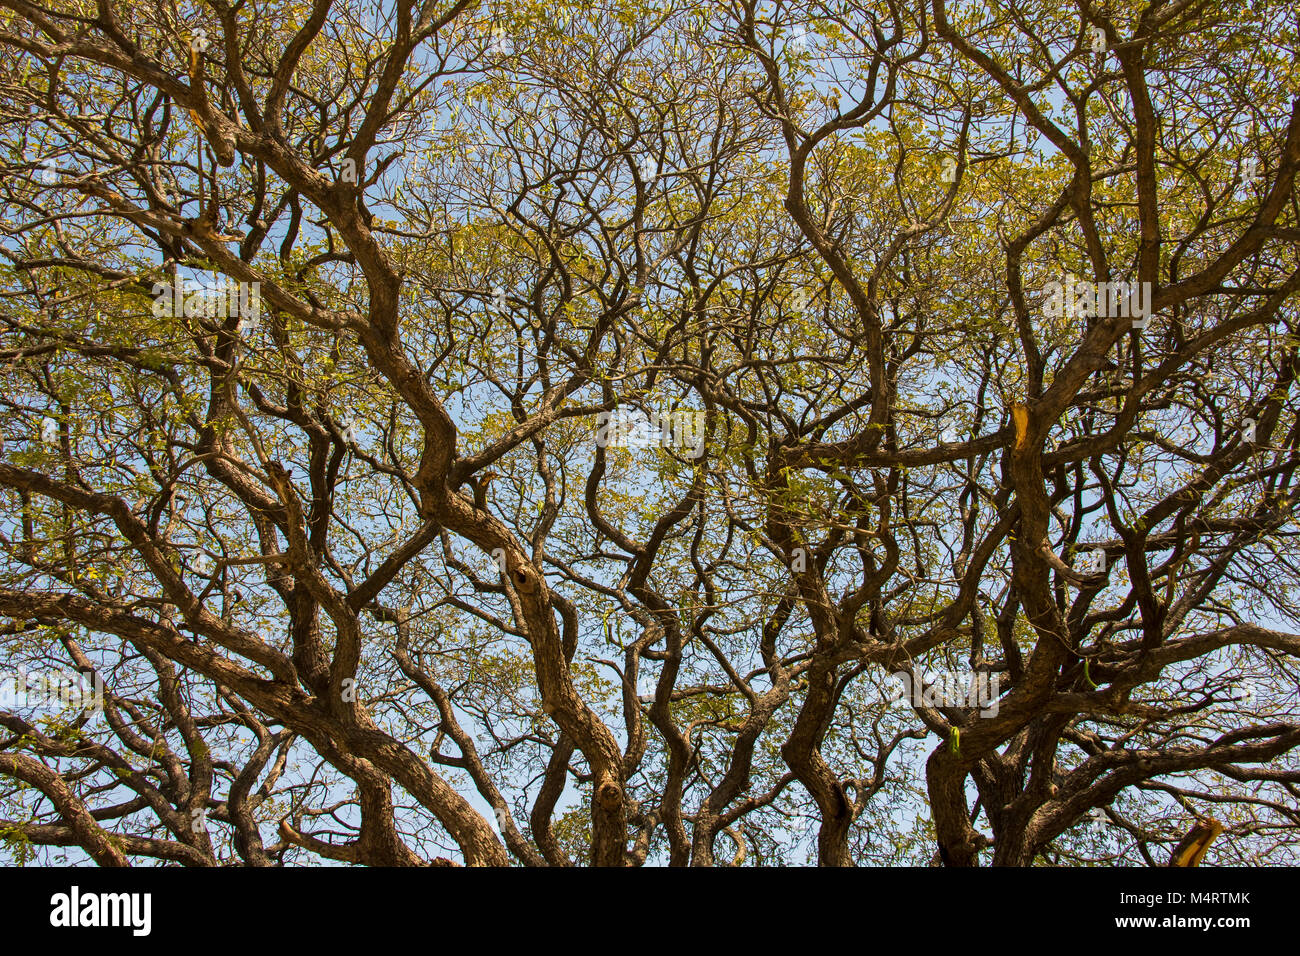 A view of the branches of tree with a background of the sky Stock Photo